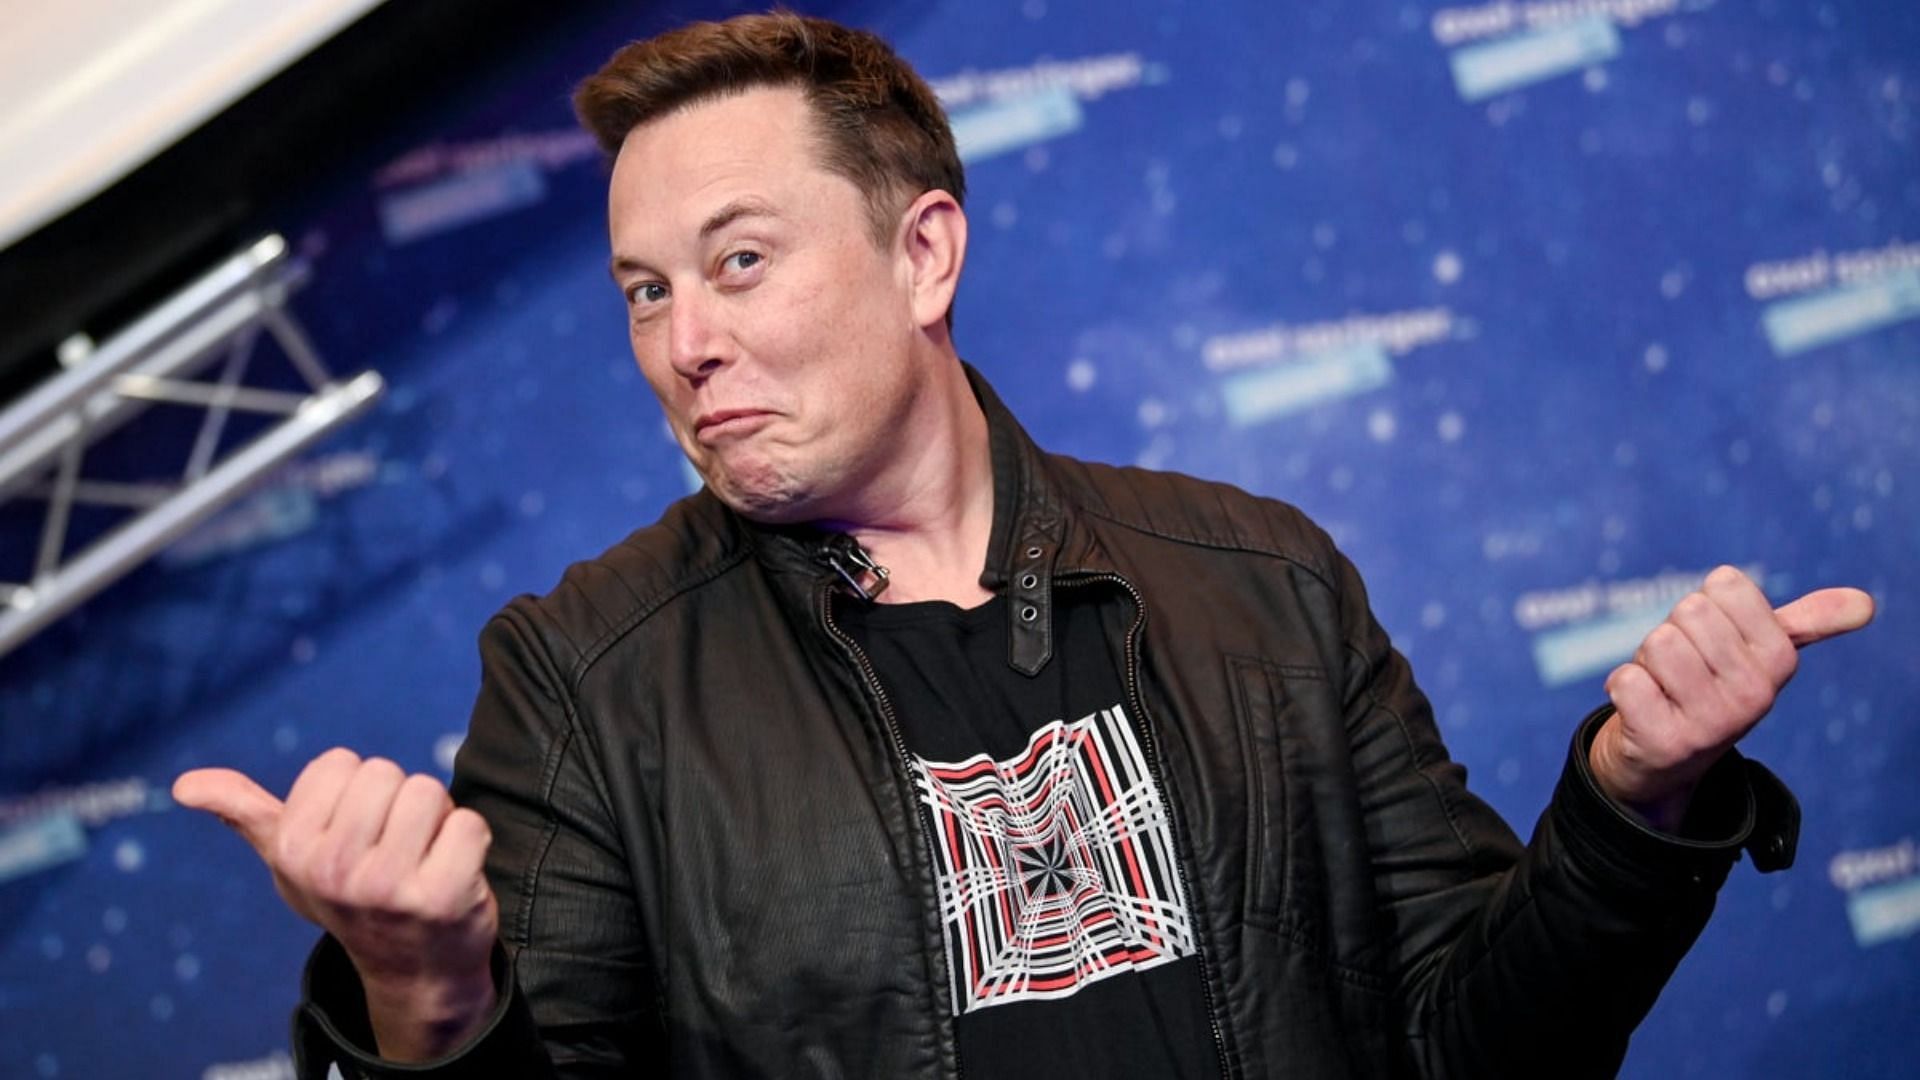 Elon Musk showed off his dance moves at the new factory opening ceremony in Europe (Image via Britta Pedersen/Getty Images)